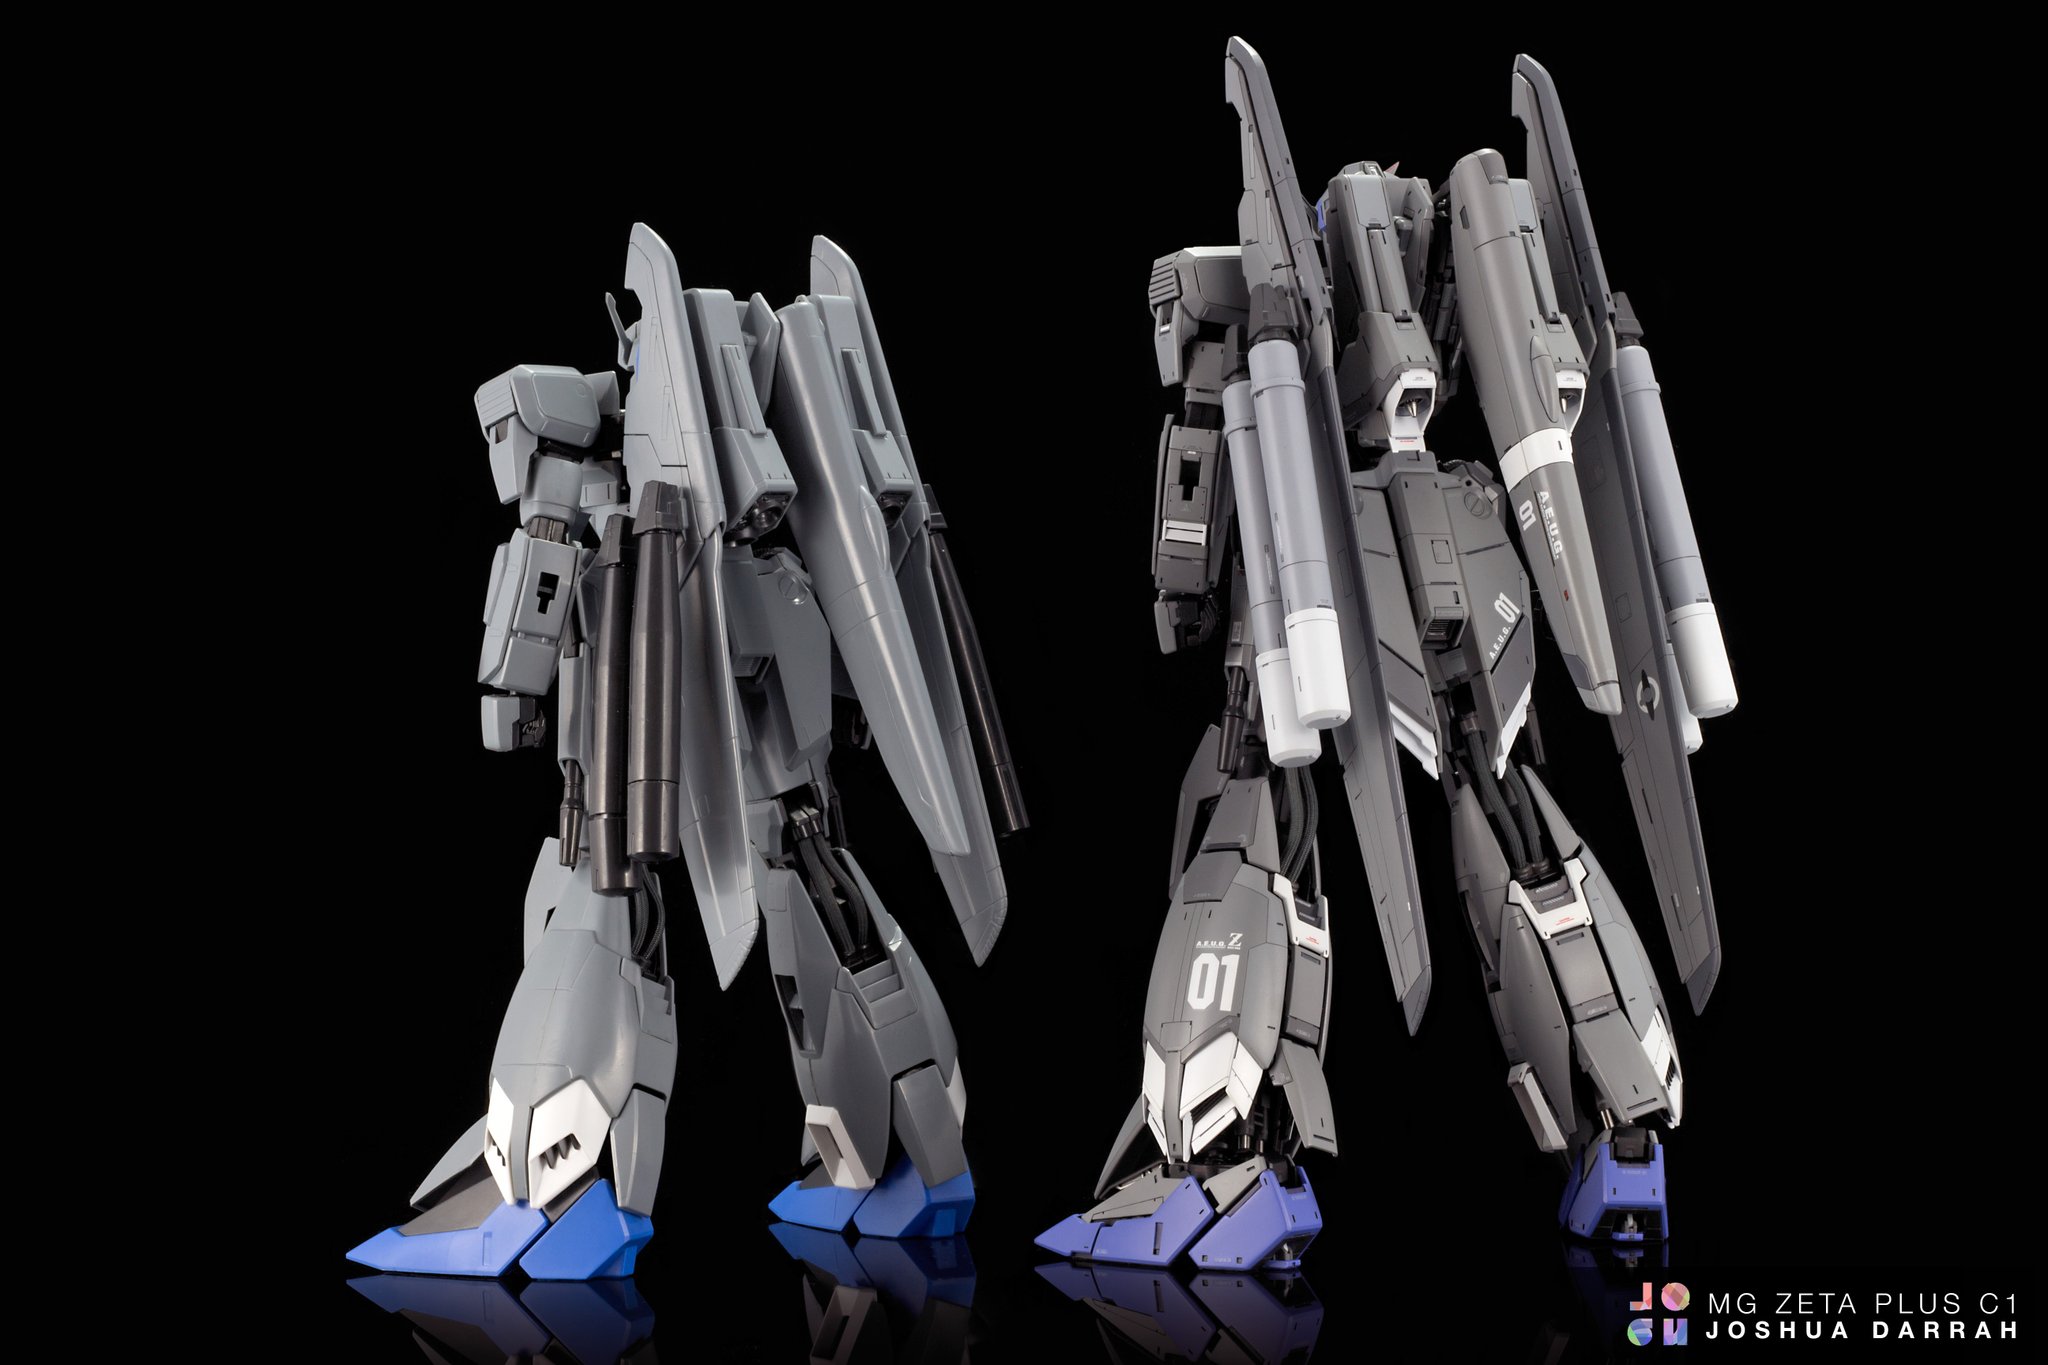 Joshua Darrah Here S A Comparison Of The Mg Zeta Plus C1 Next To The Out Of Box Kit You Can See The Longer Wings And Rear Skirts And Also The